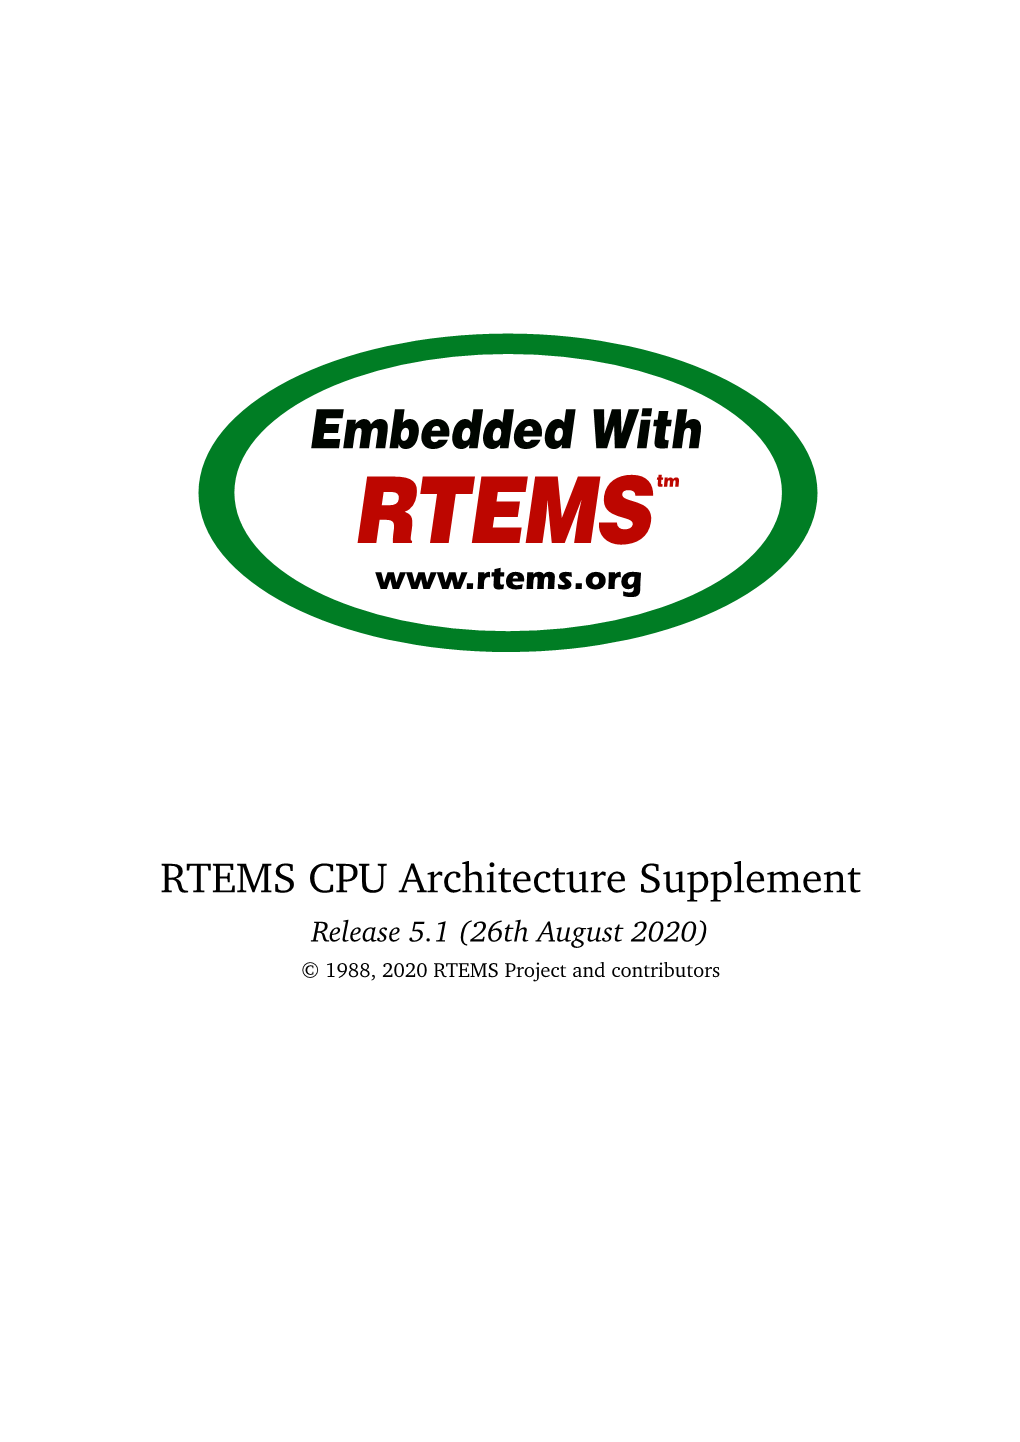 RTEMS CPU Architecture Supplement Release 5.1 (26Th August 2020) © 1988, 2020 RTEMS Project and Contributors